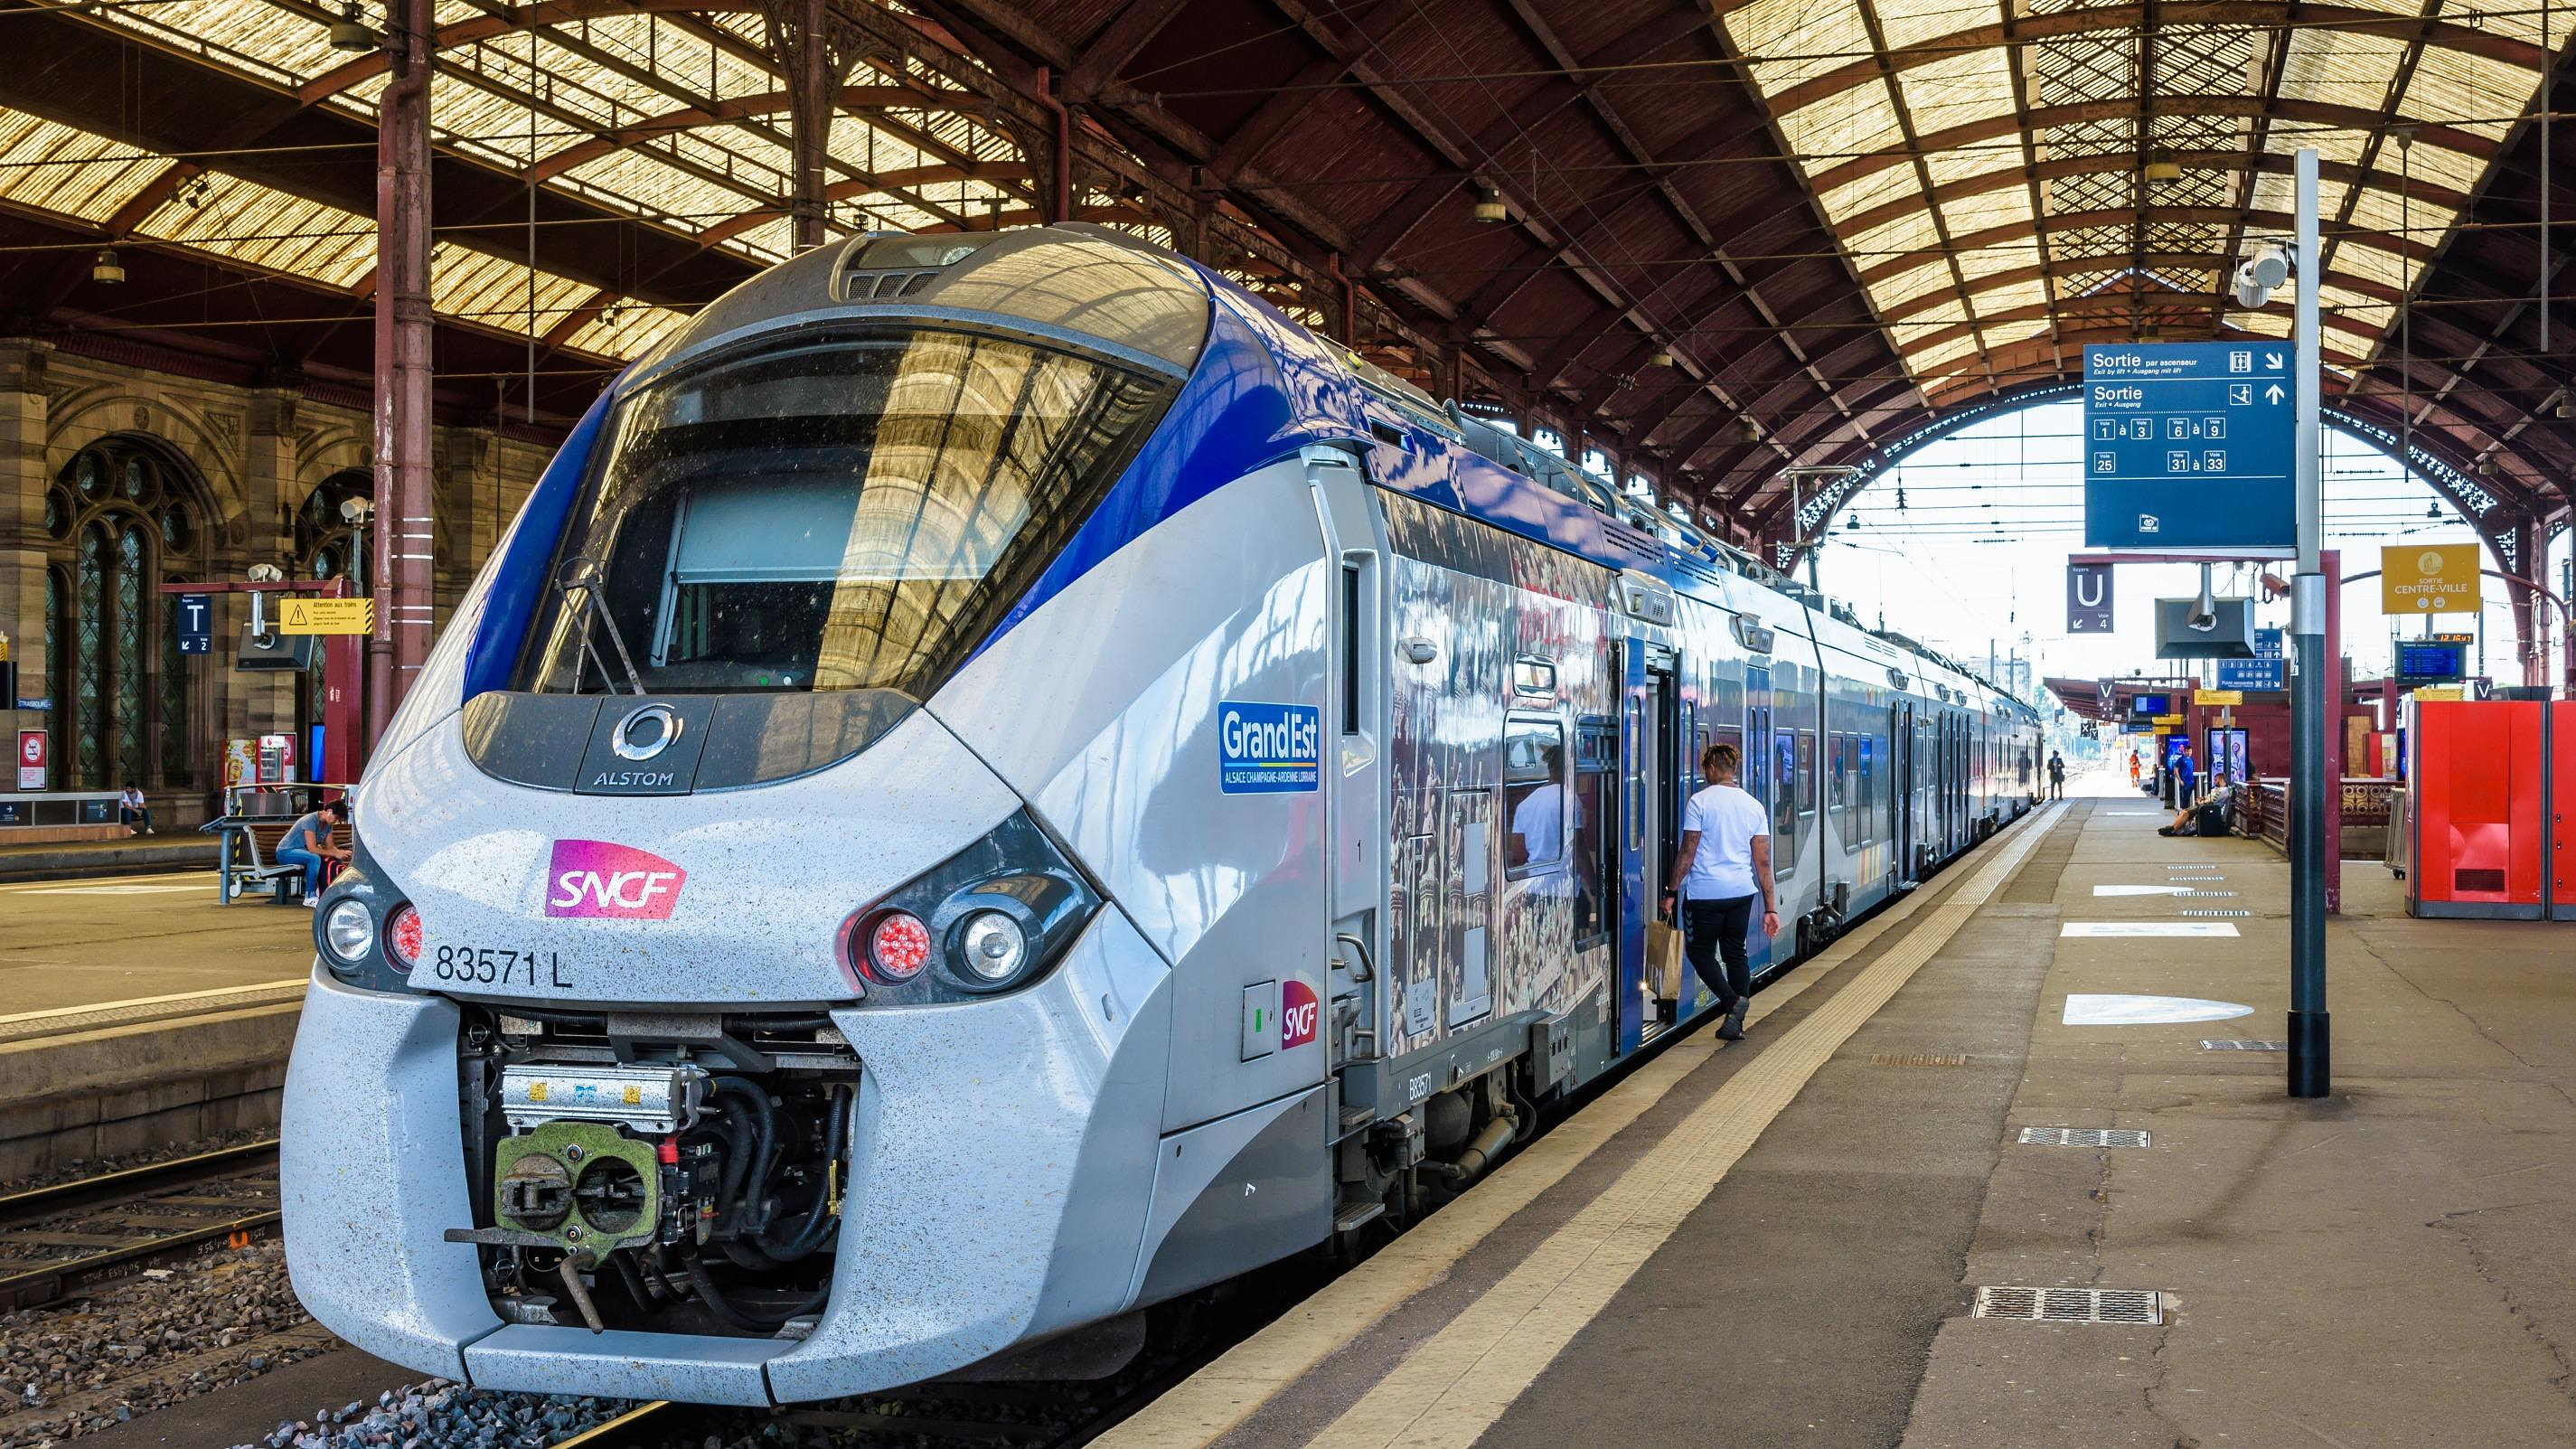 For the Olympics, SNCF is developing an instant translation application